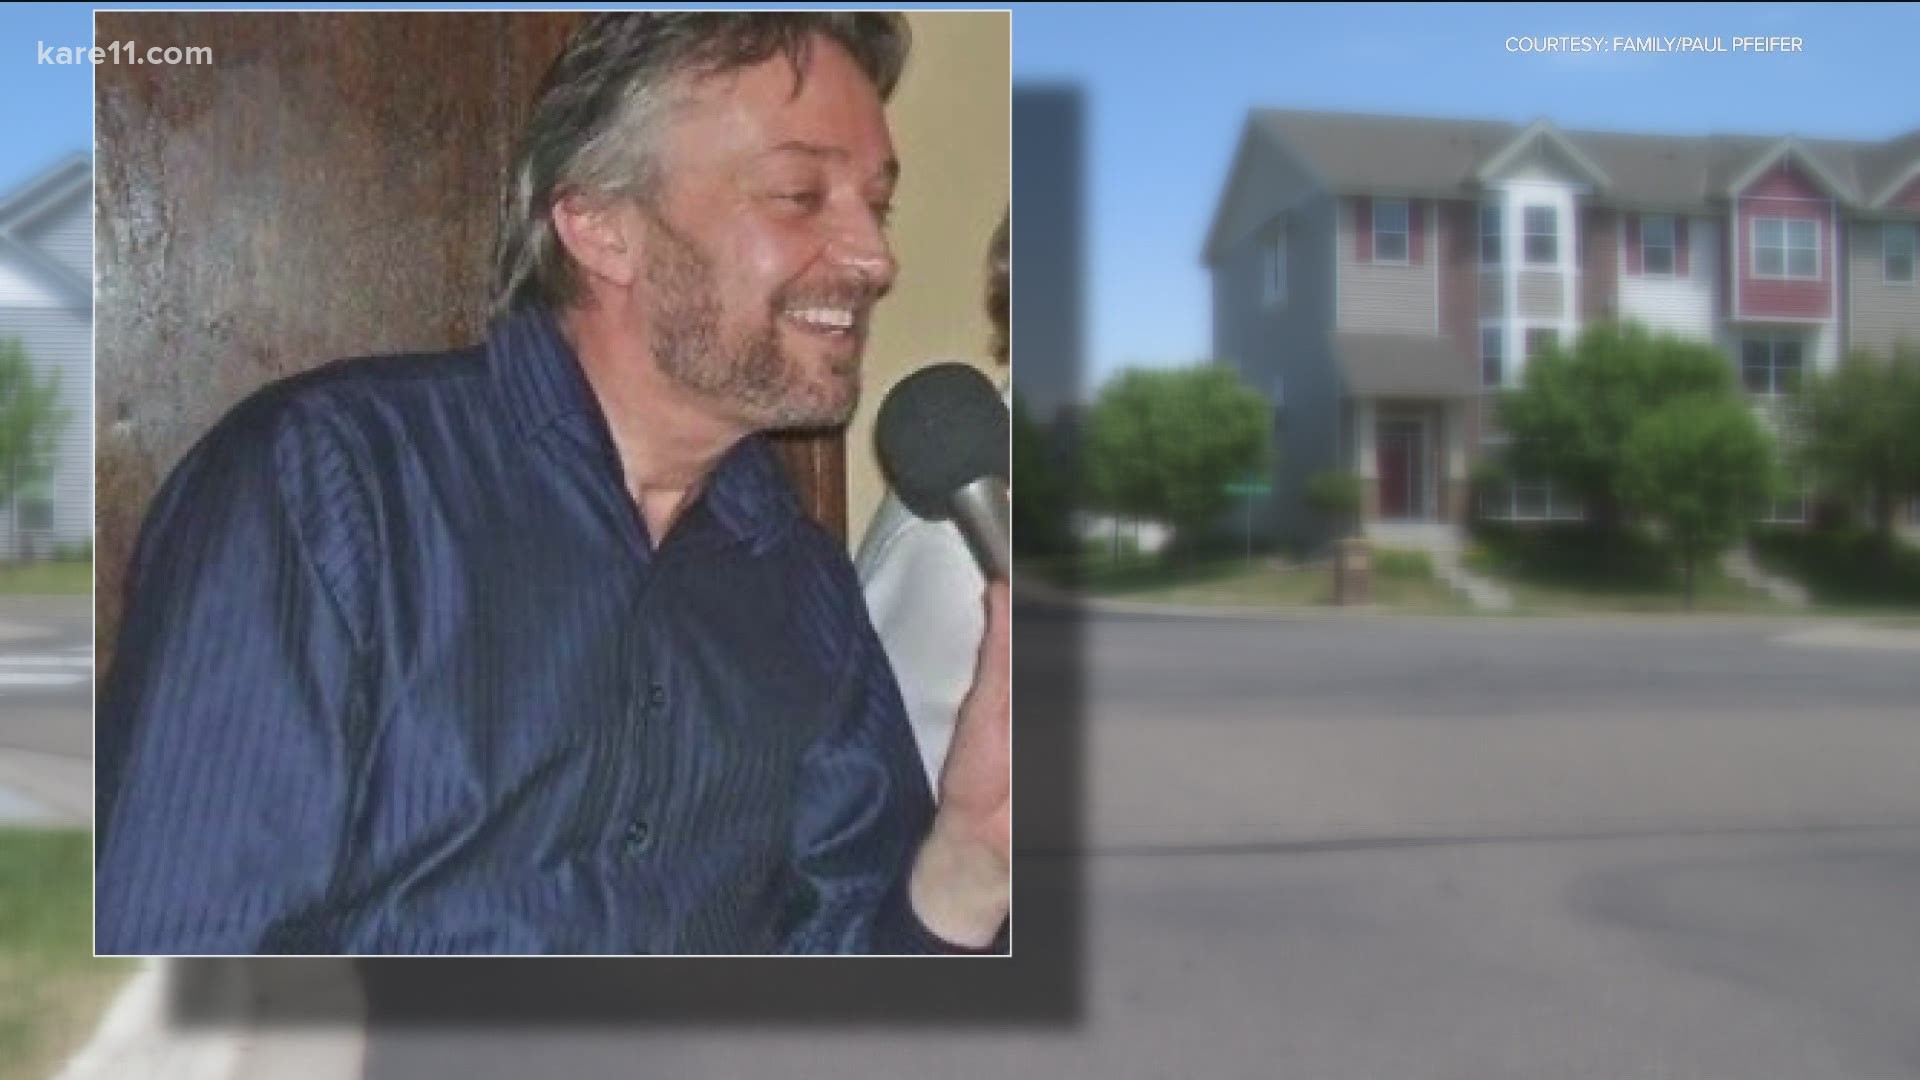 Family members identified the victim as Paul Pfeifer.  "Paul was such a lovely person," said one neighbor.